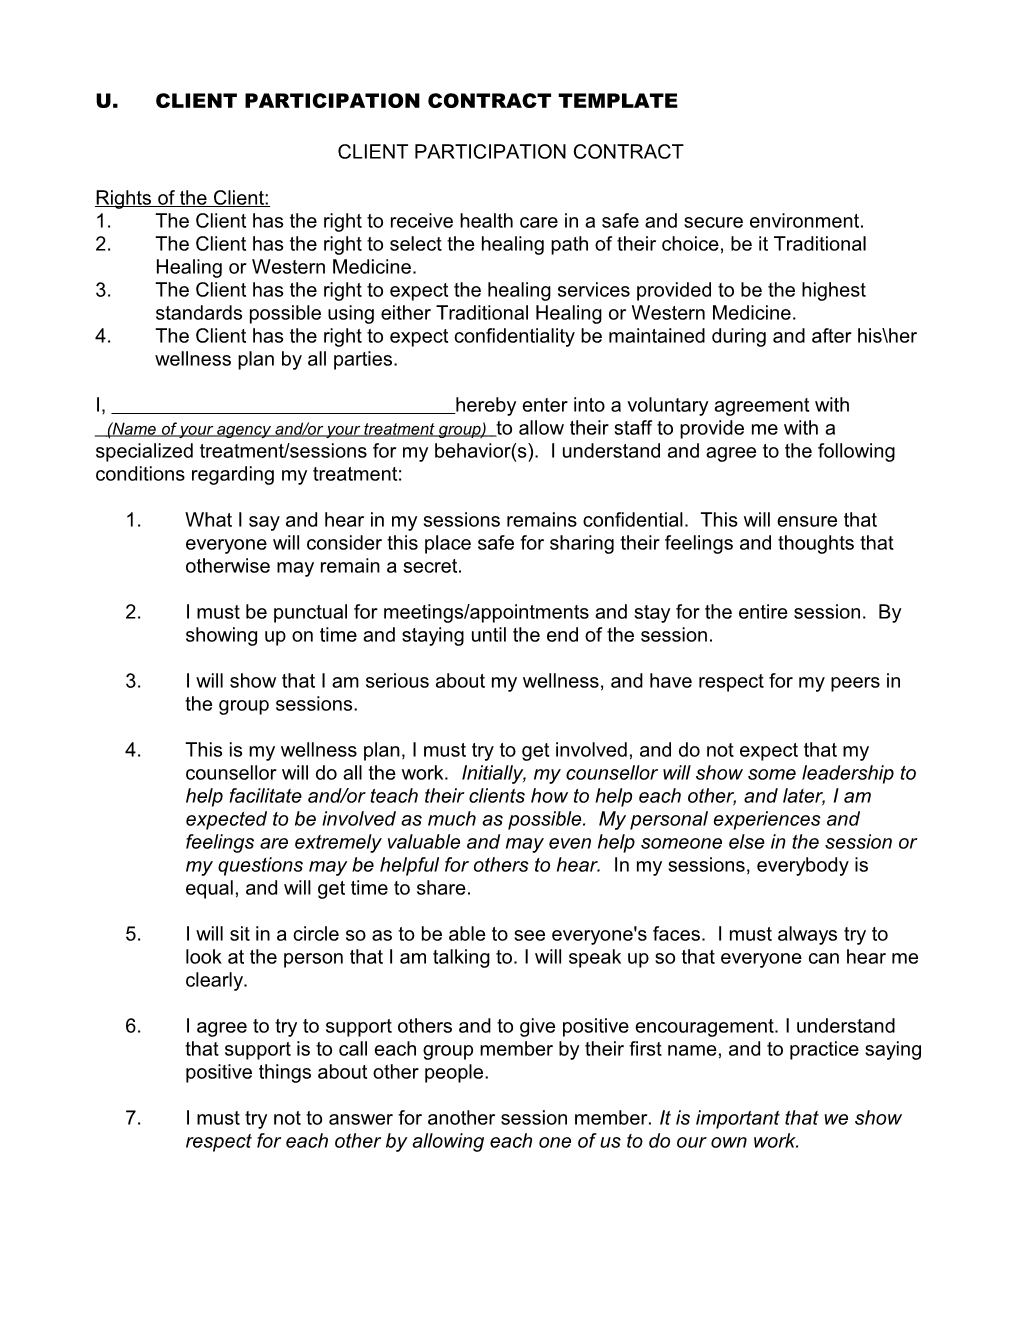 CONSENT to WELLNESS PLAN CONTRACT